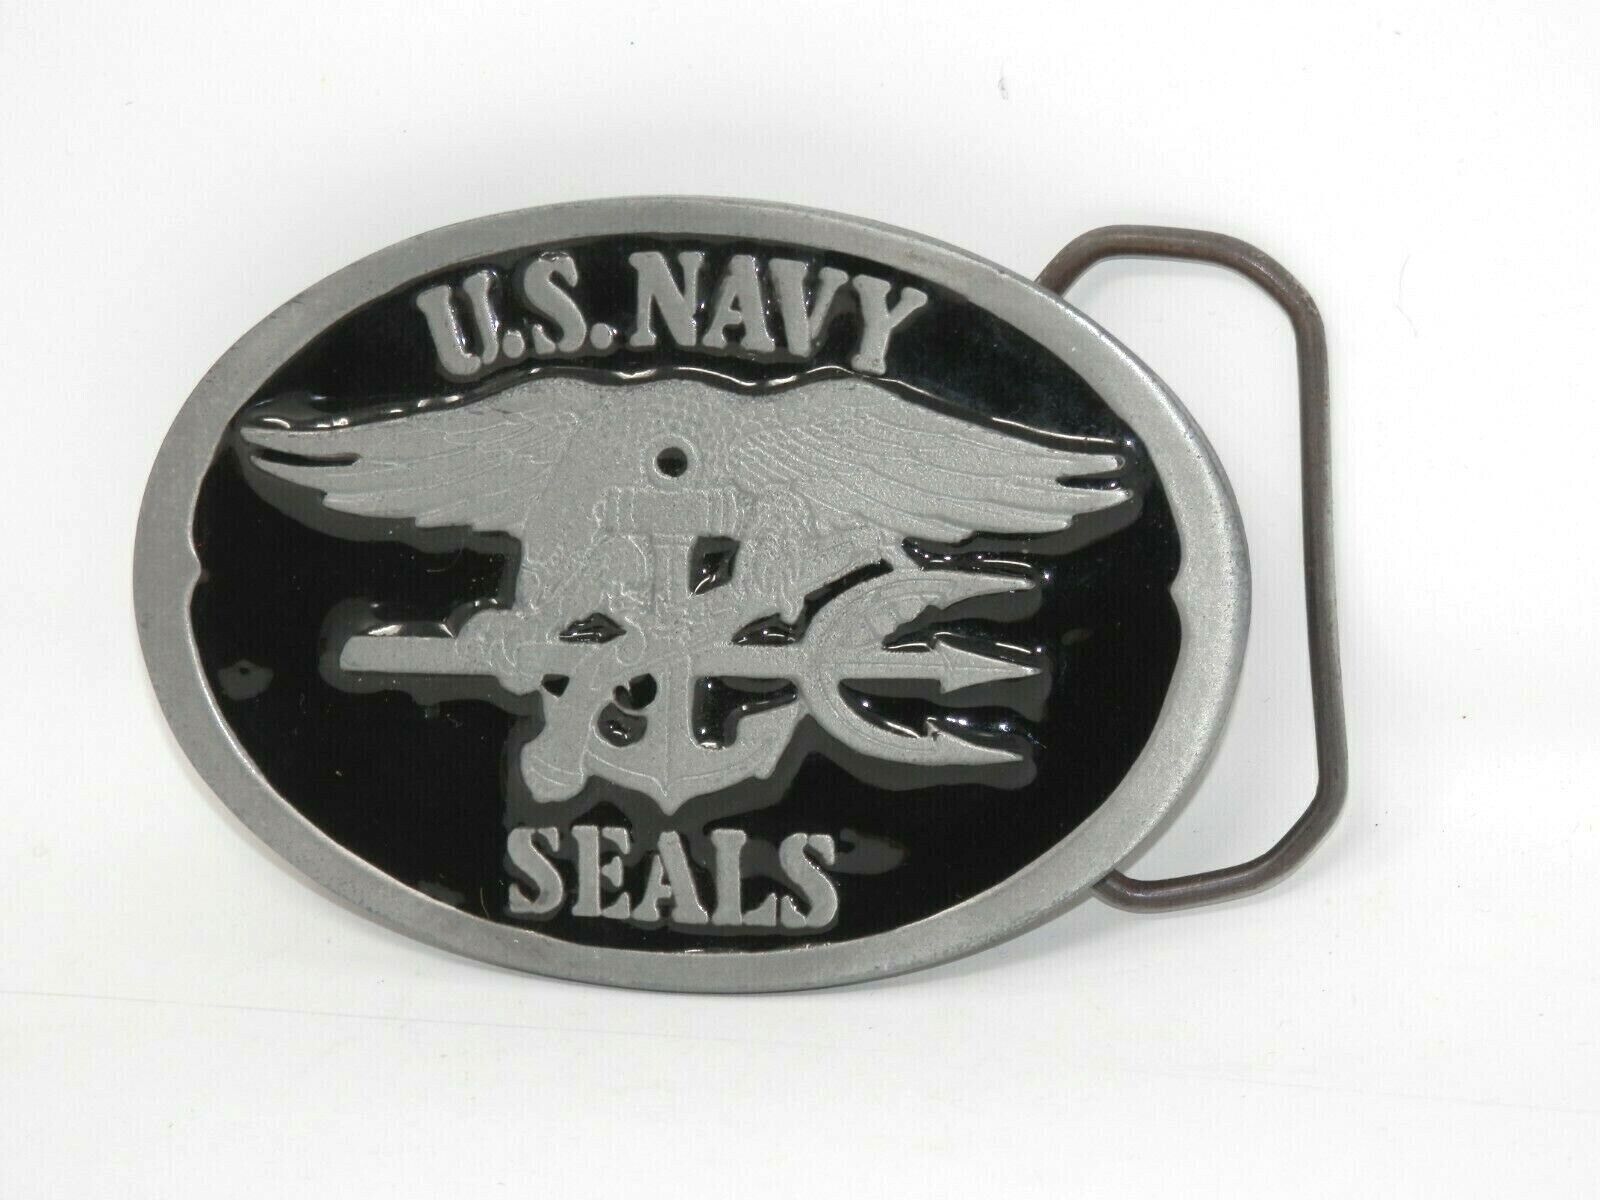 Primary image for NAVY SEALS TRIDENT BELT BUCKLE